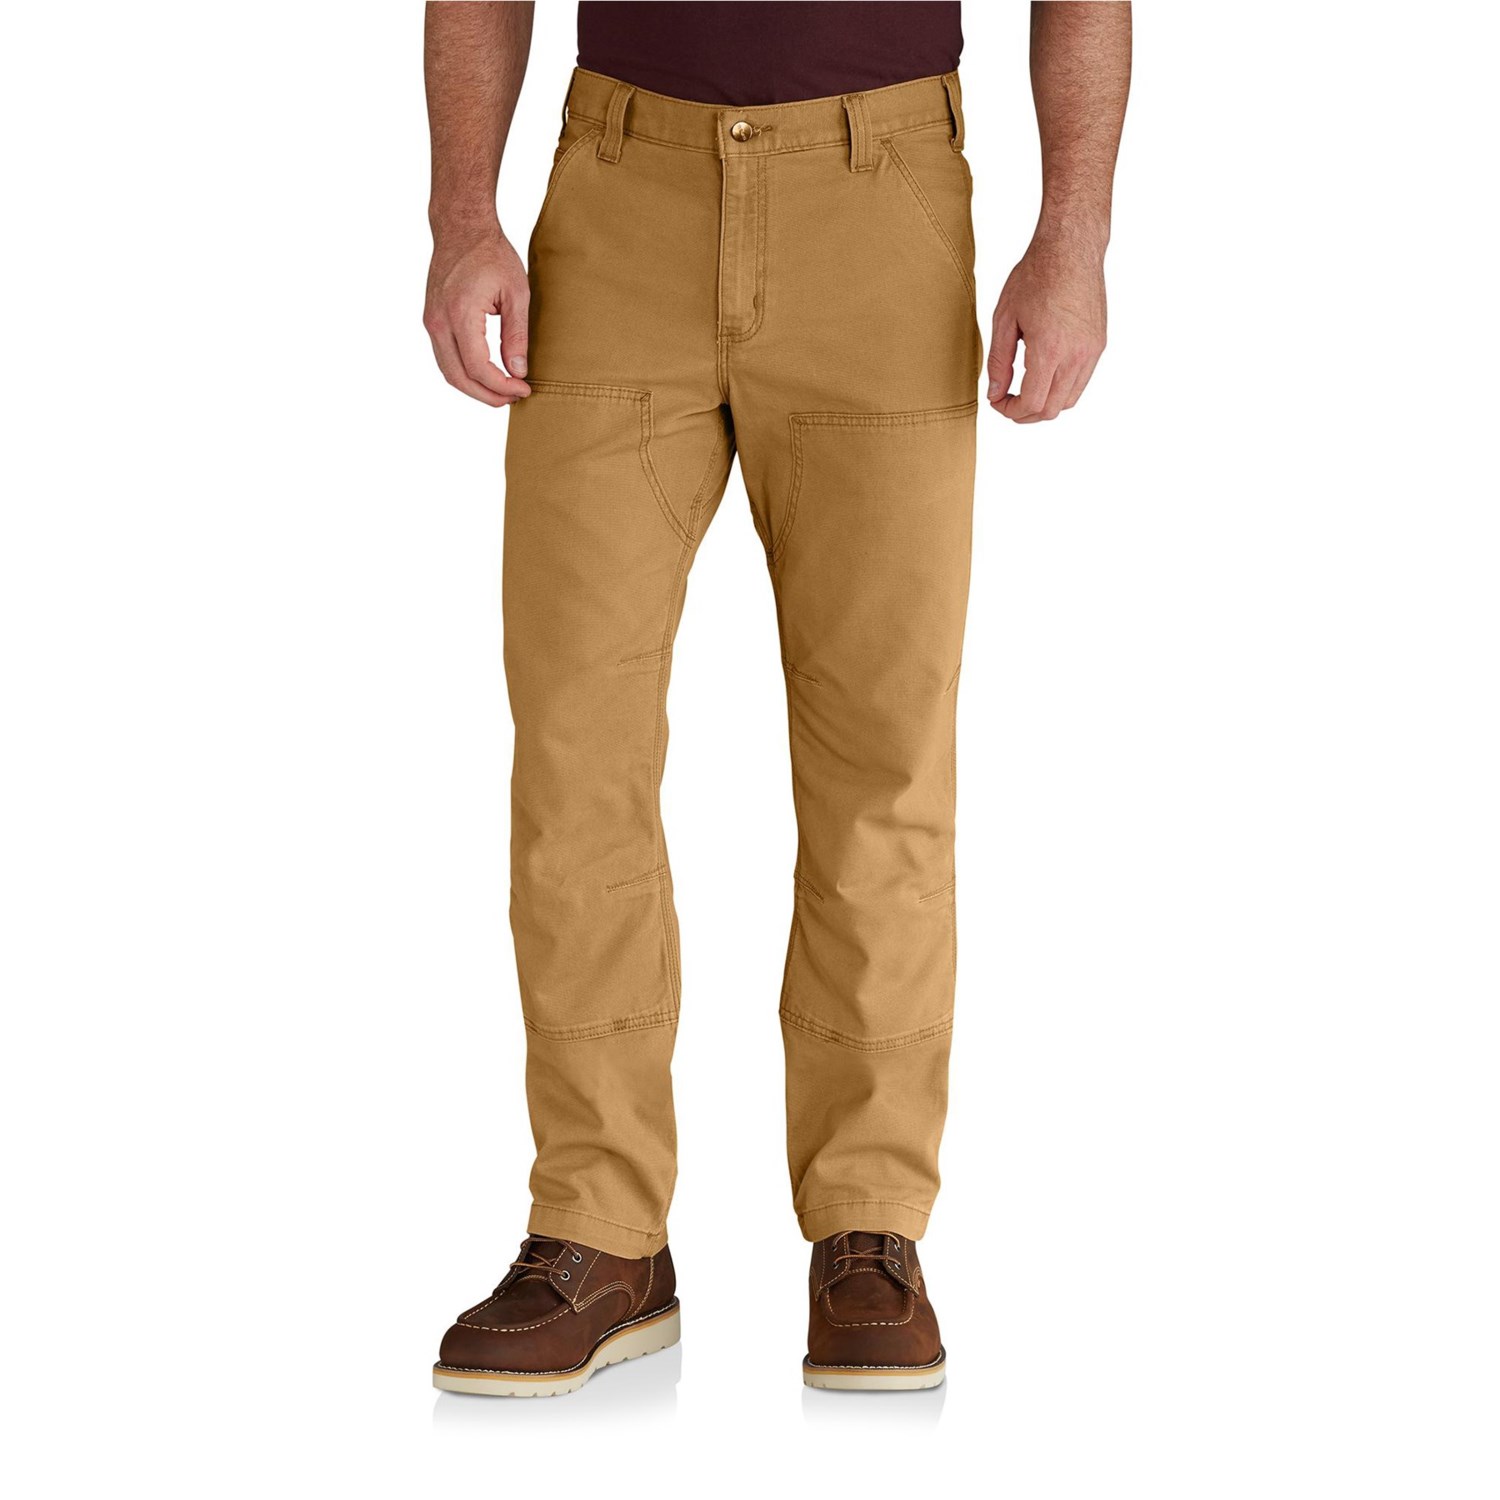 Carhartt Pants For Men Page 2 - Pants Store